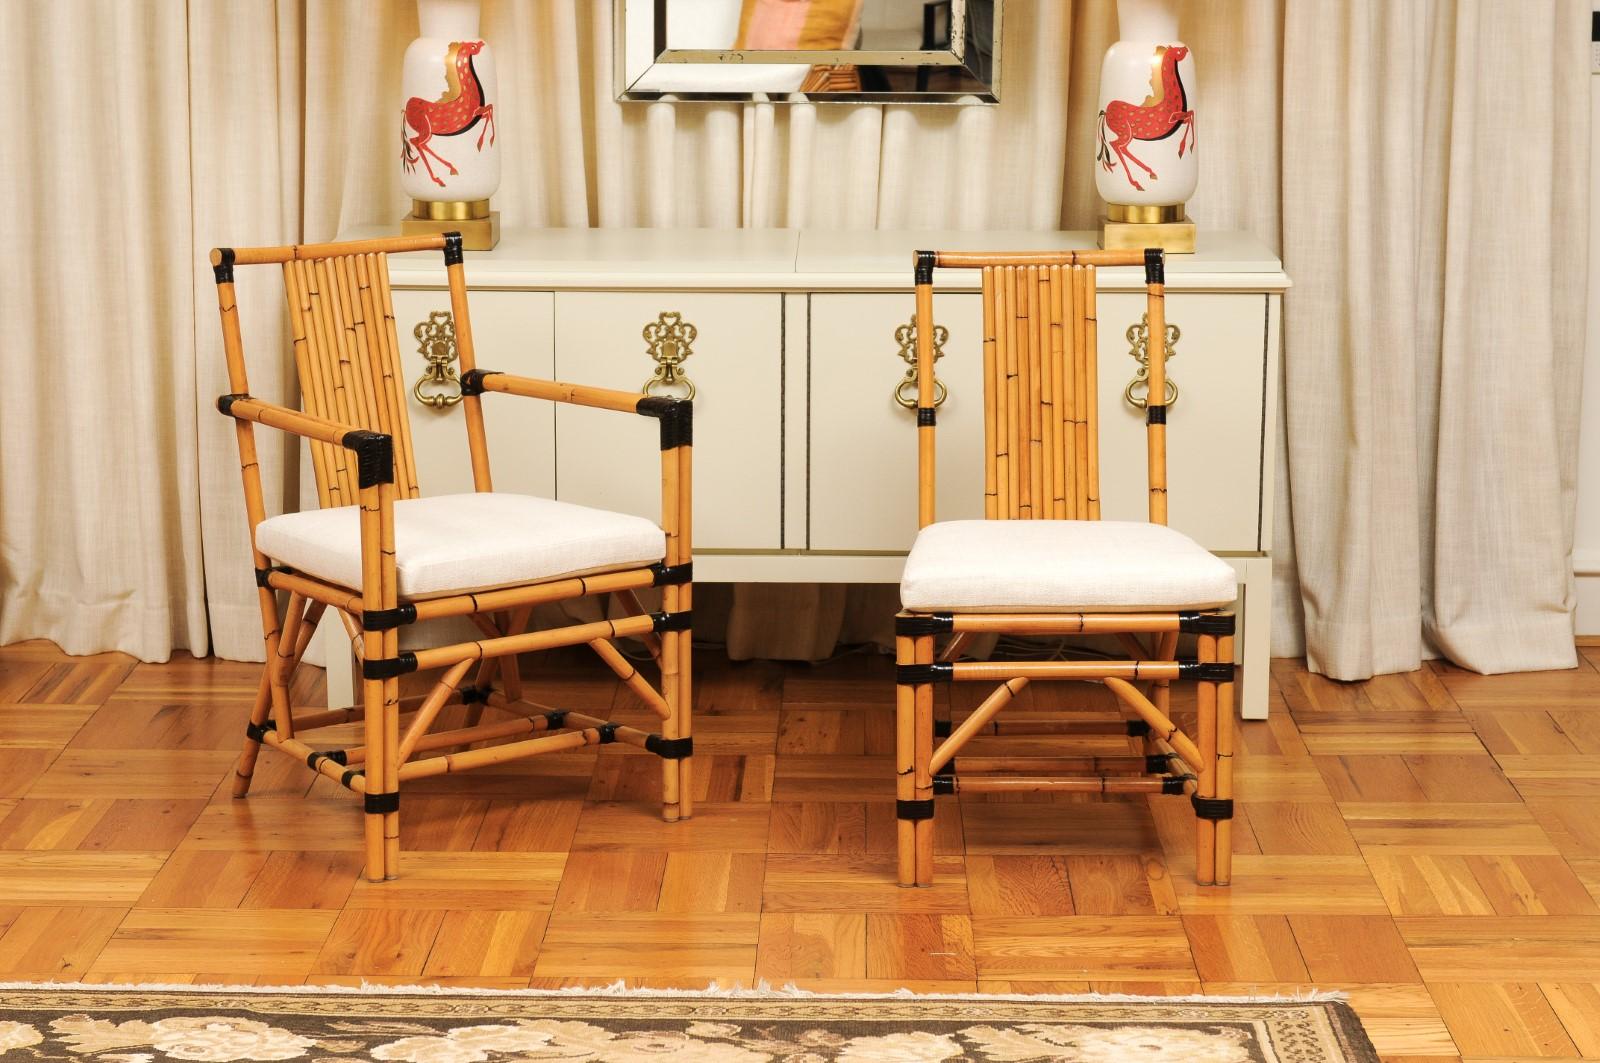 The magnificent set is shipped as professionally photographed and described in the listing narrative: Meticulously professionally restored, newly custom upholstered and completely installation ready. Expert custom upholstery service is